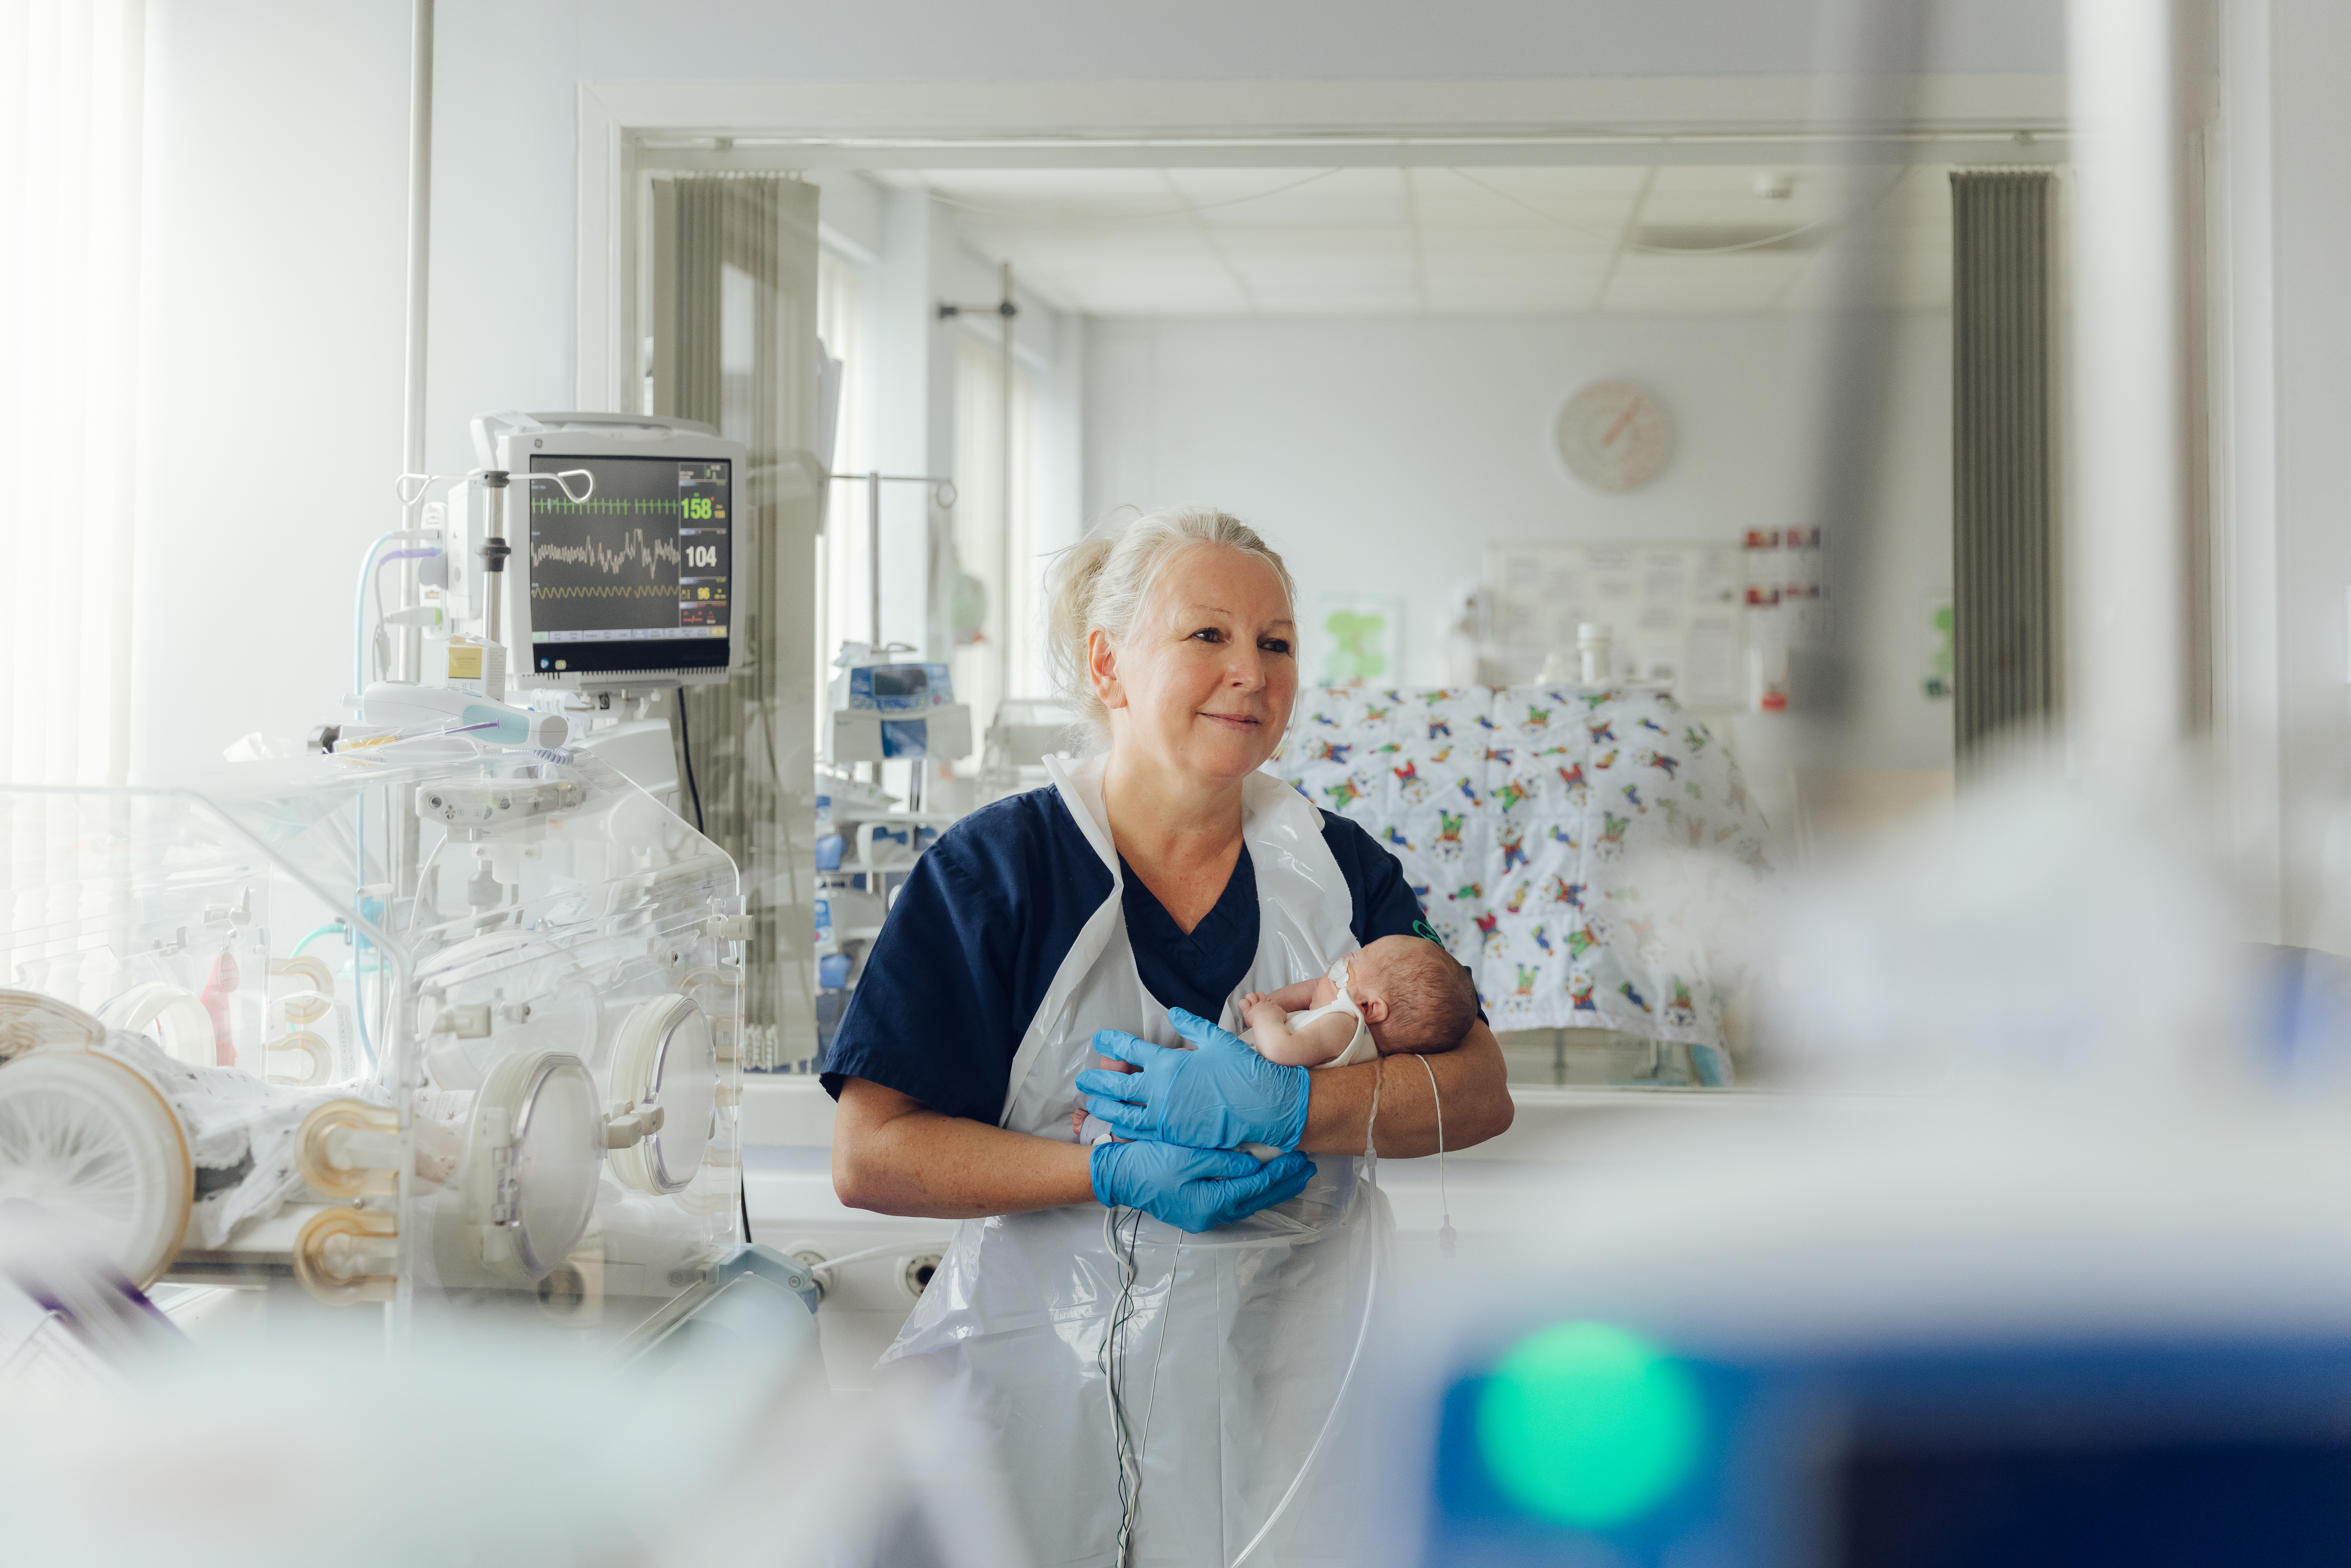 a woman holding a baby in a hospital room